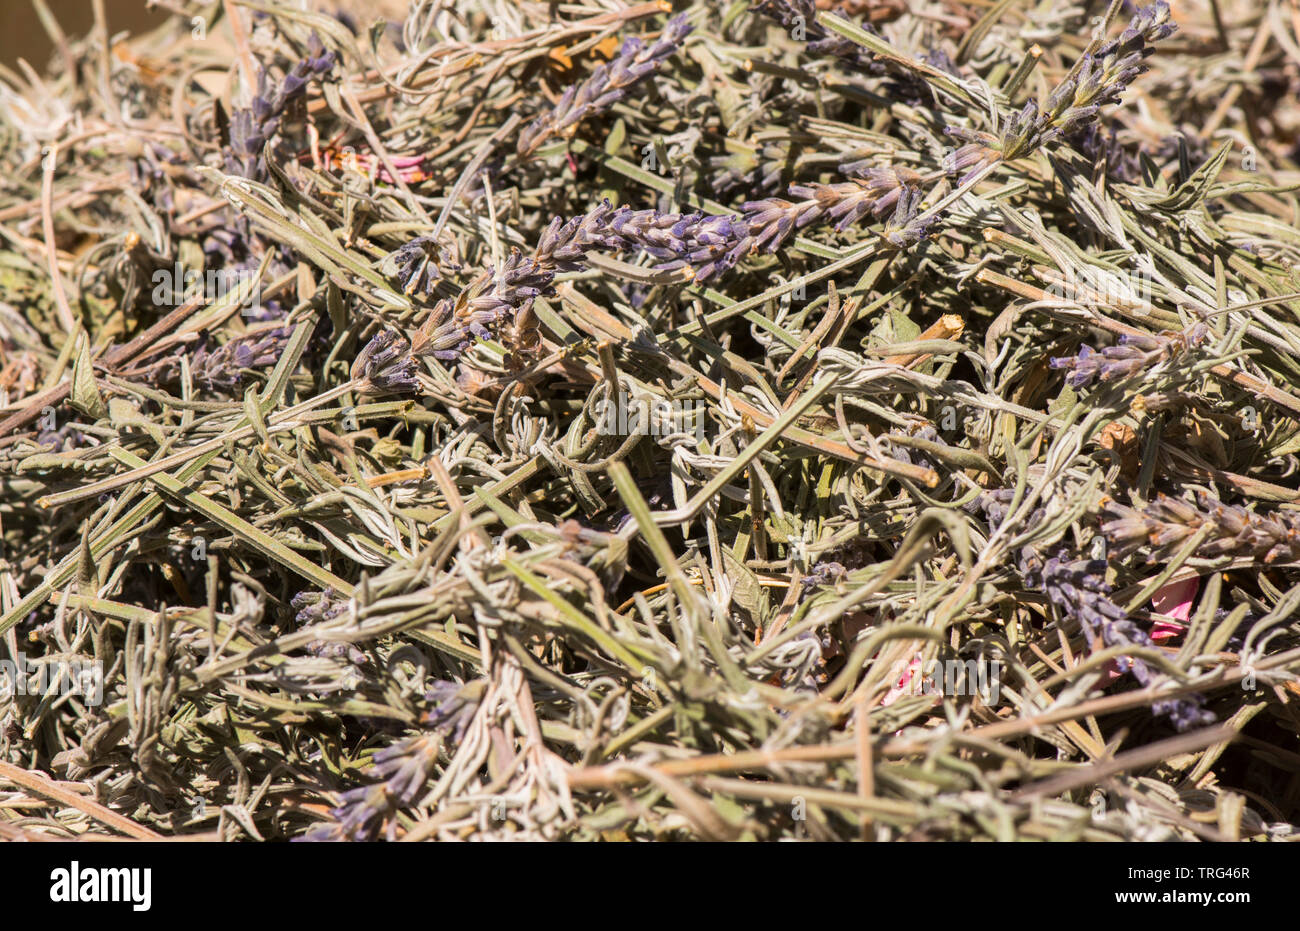 Lavender plants collected and drying. Stock Photo